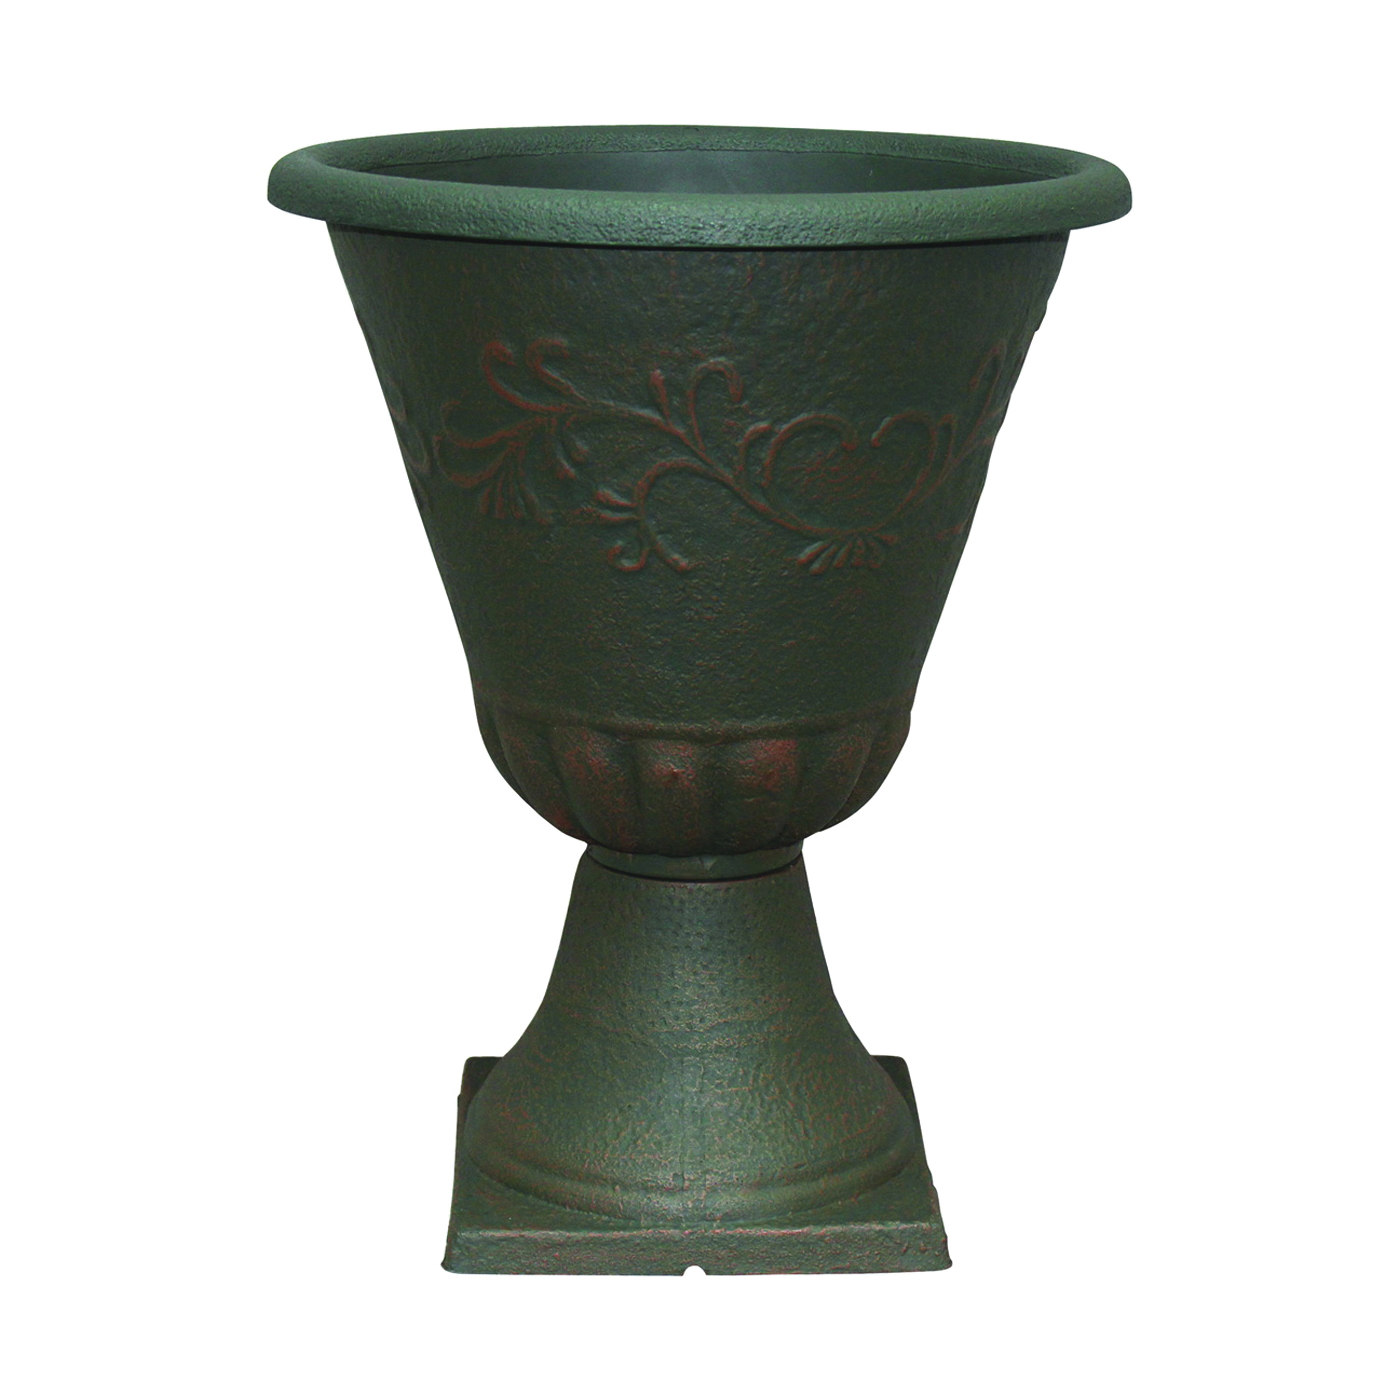 EB-029809 Sonoma Urn, 21 in H, 16 in W, 16 in D, Resin/Stone Composite, Rust